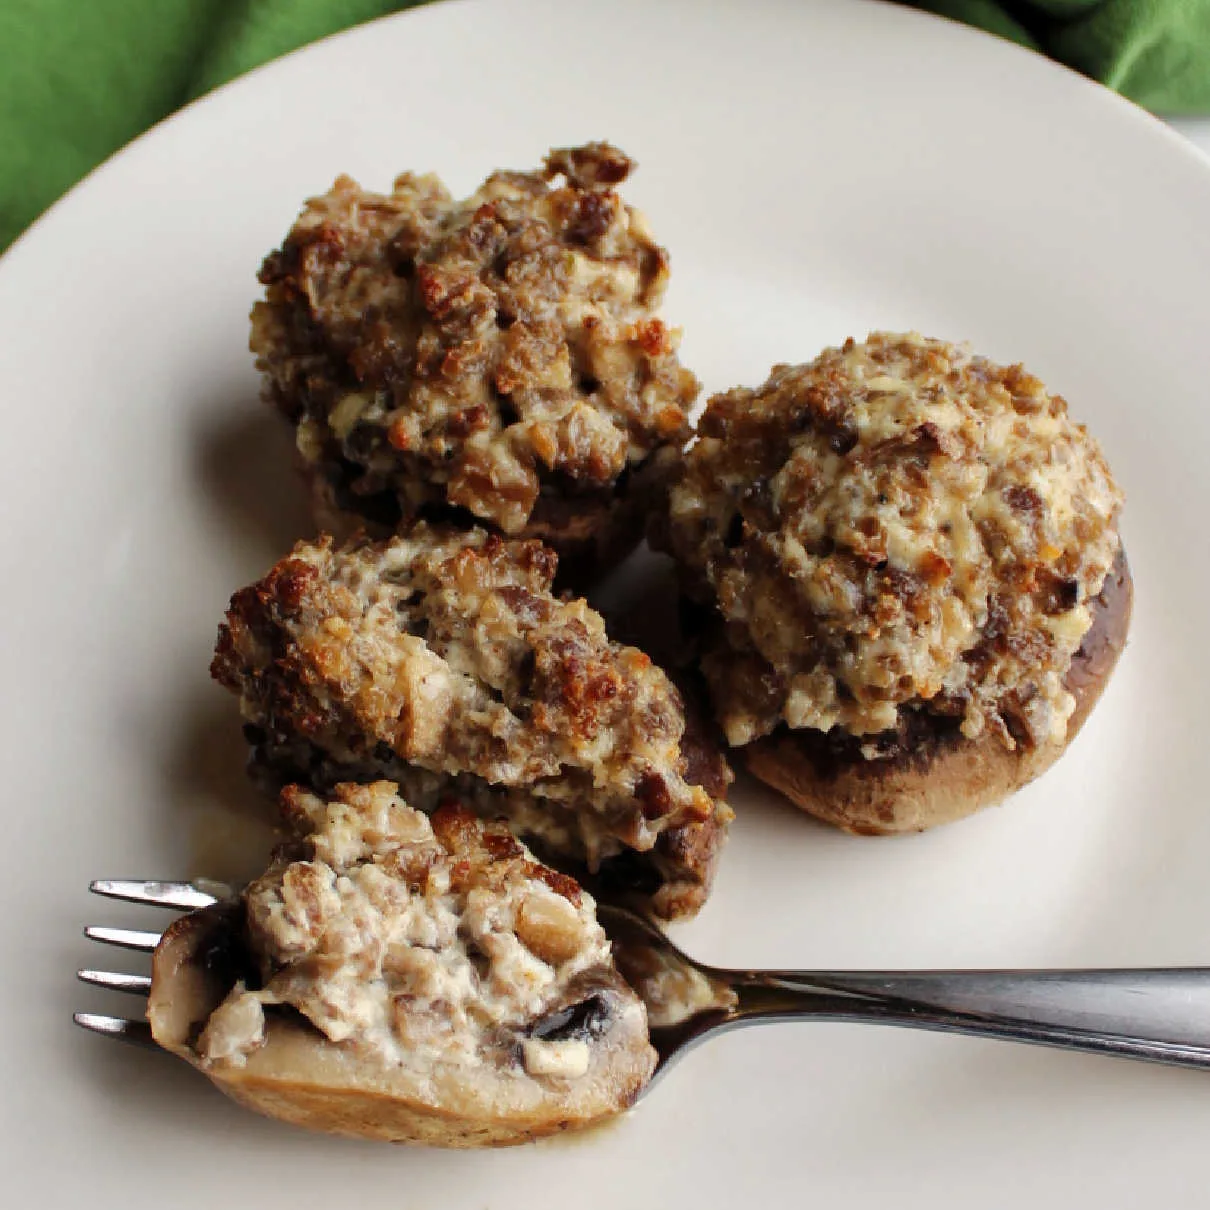 Plate of stuffed mushrooms filled with sausage and cream cheese mixture.